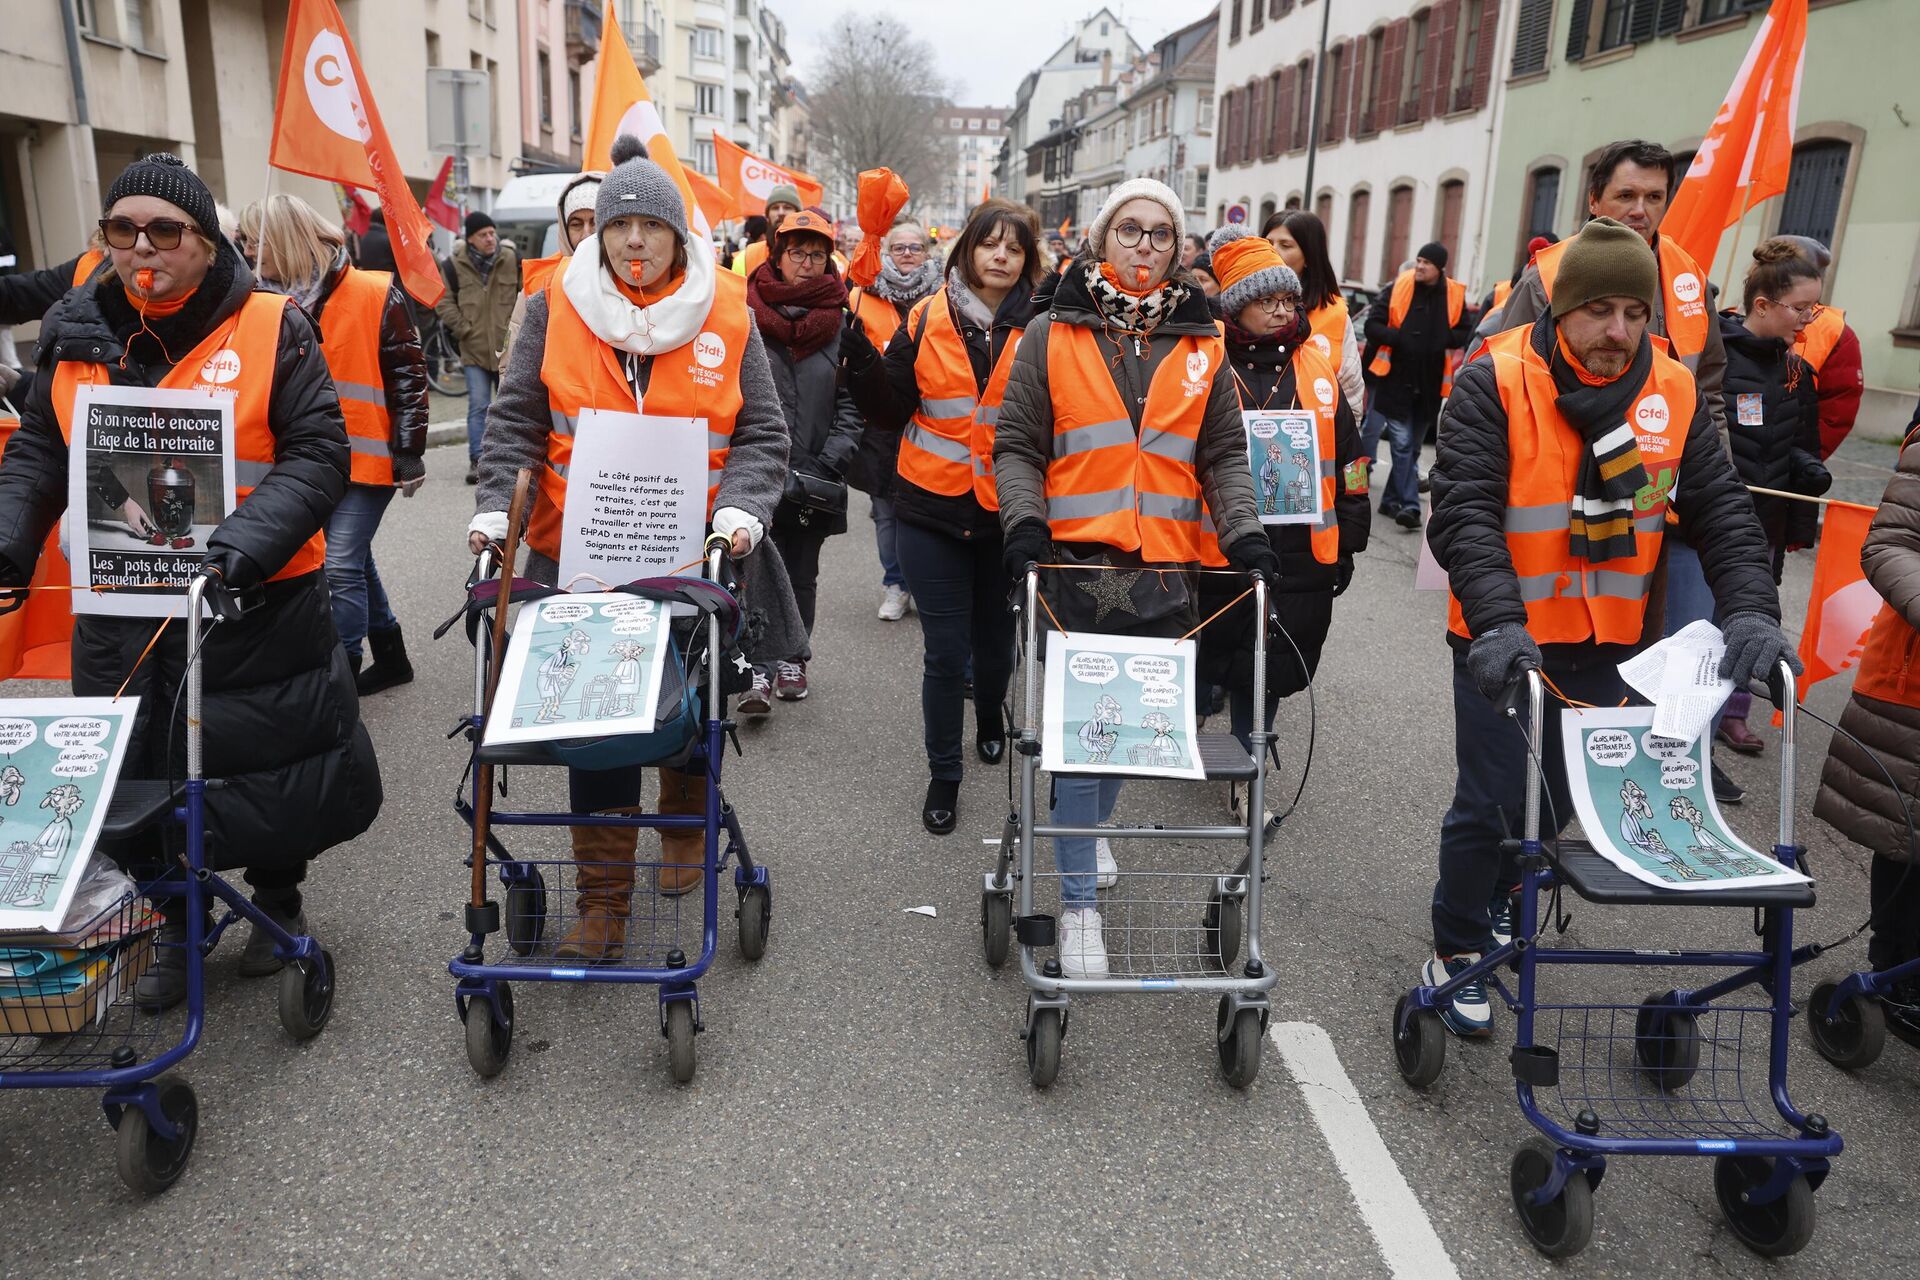 Protestors march with walkers as they demonstrate against proposed pension changes,Thursday, Jan. 19, 2023 in Strasbourg, eastern France.  - Sputnik International, 1920, 21.01.2023